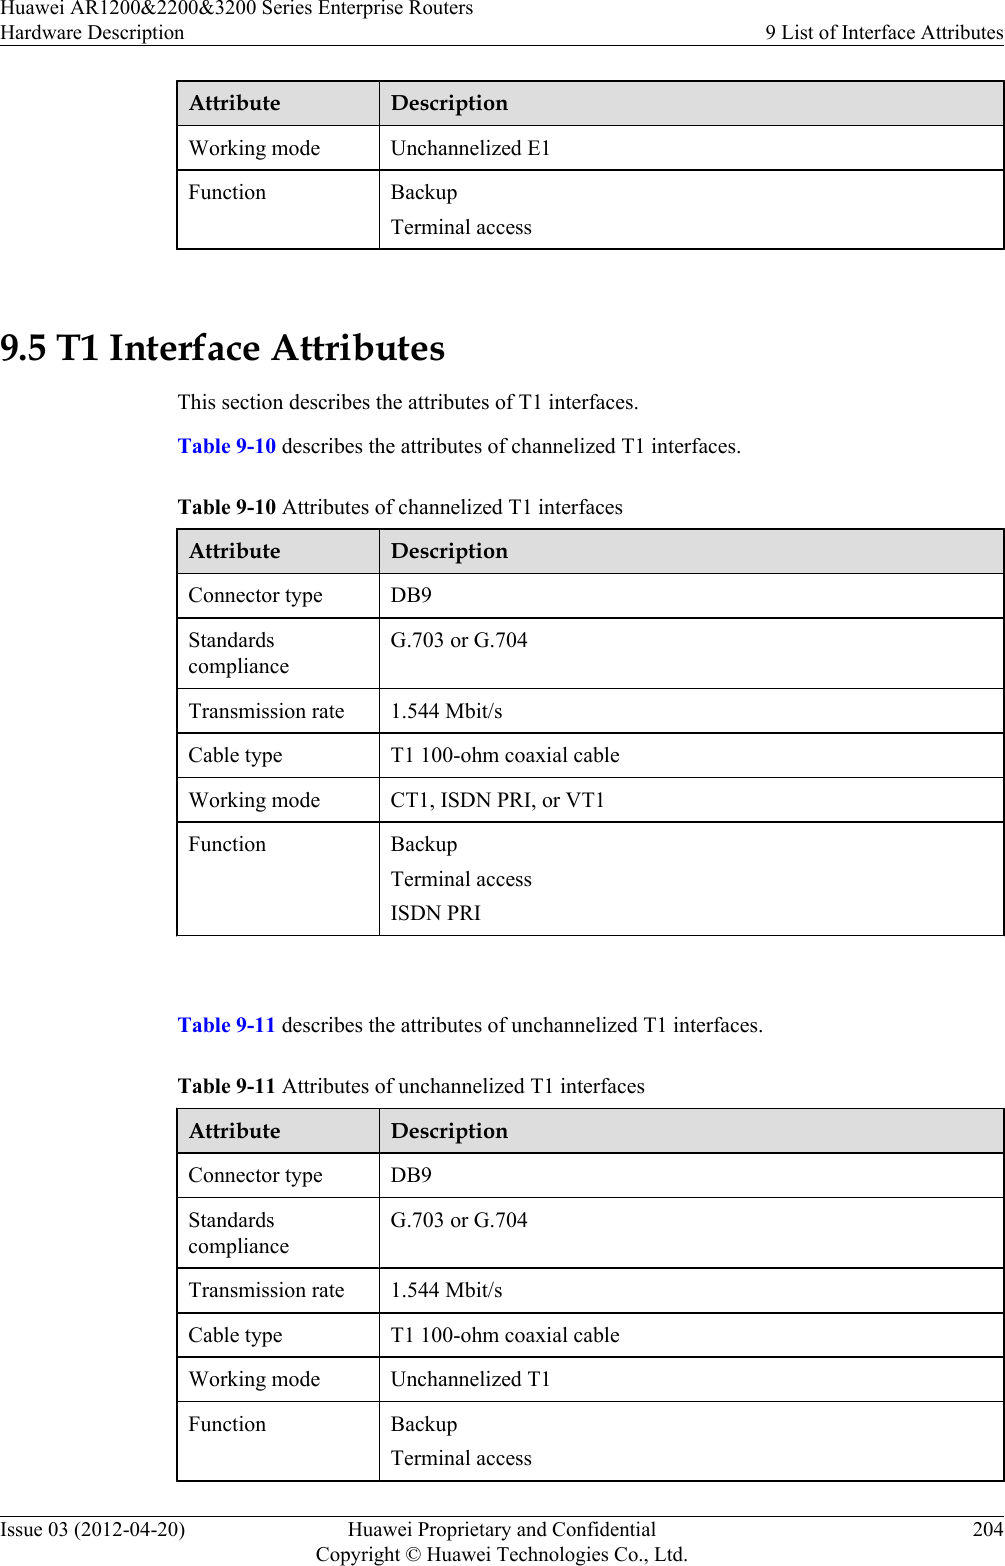 Attribute DescriptionWorking mode Unchannelized E1Function BackupTerminal access 9.5 T1 Interface AttributesThis section describes the attributes of T1 interfaces.Table 9-10 describes the attributes of channelized T1 interfaces.Table 9-10 Attributes of channelized T1 interfacesAttribute DescriptionConnector type DB9StandardscomplianceG.703 or G.704Transmission rate 1.544 Mbit/sCable type T1 100-ohm coaxial cableWorking mode CT1, ISDN PRI, or VT1Function BackupTerminal accessISDN PRI Table 9-11 describes the attributes of unchannelized T1 interfaces.Table 9-11 Attributes of unchannelized T1 interfacesAttribute DescriptionConnector type DB9StandardscomplianceG.703 or G.704Transmission rate 1.544 Mbit/sCable type T1 100-ohm coaxial cableWorking mode Unchannelized T1Function BackupTerminal accessHuawei AR1200&amp;2200&amp;3200 Series Enterprise RoutersHardware Description 9 List of Interface AttributesIssue 03 (2012-04-20) Huawei Proprietary and ConfidentialCopyright © Huawei Technologies Co., Ltd.204